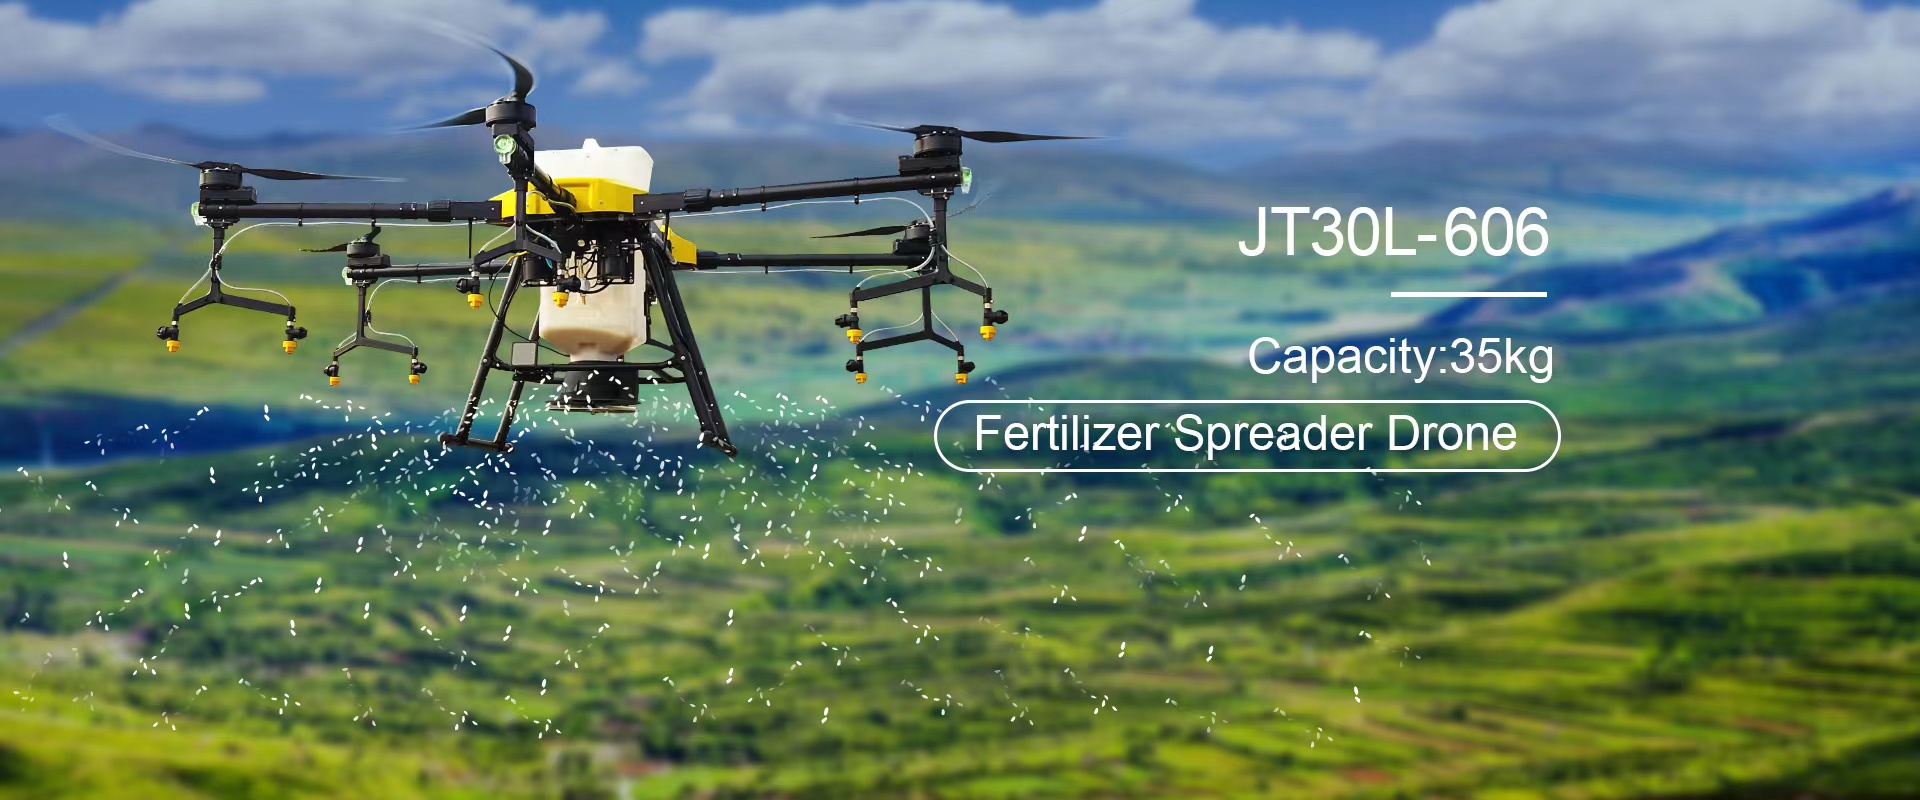 Why choose agricultural sprayer drones